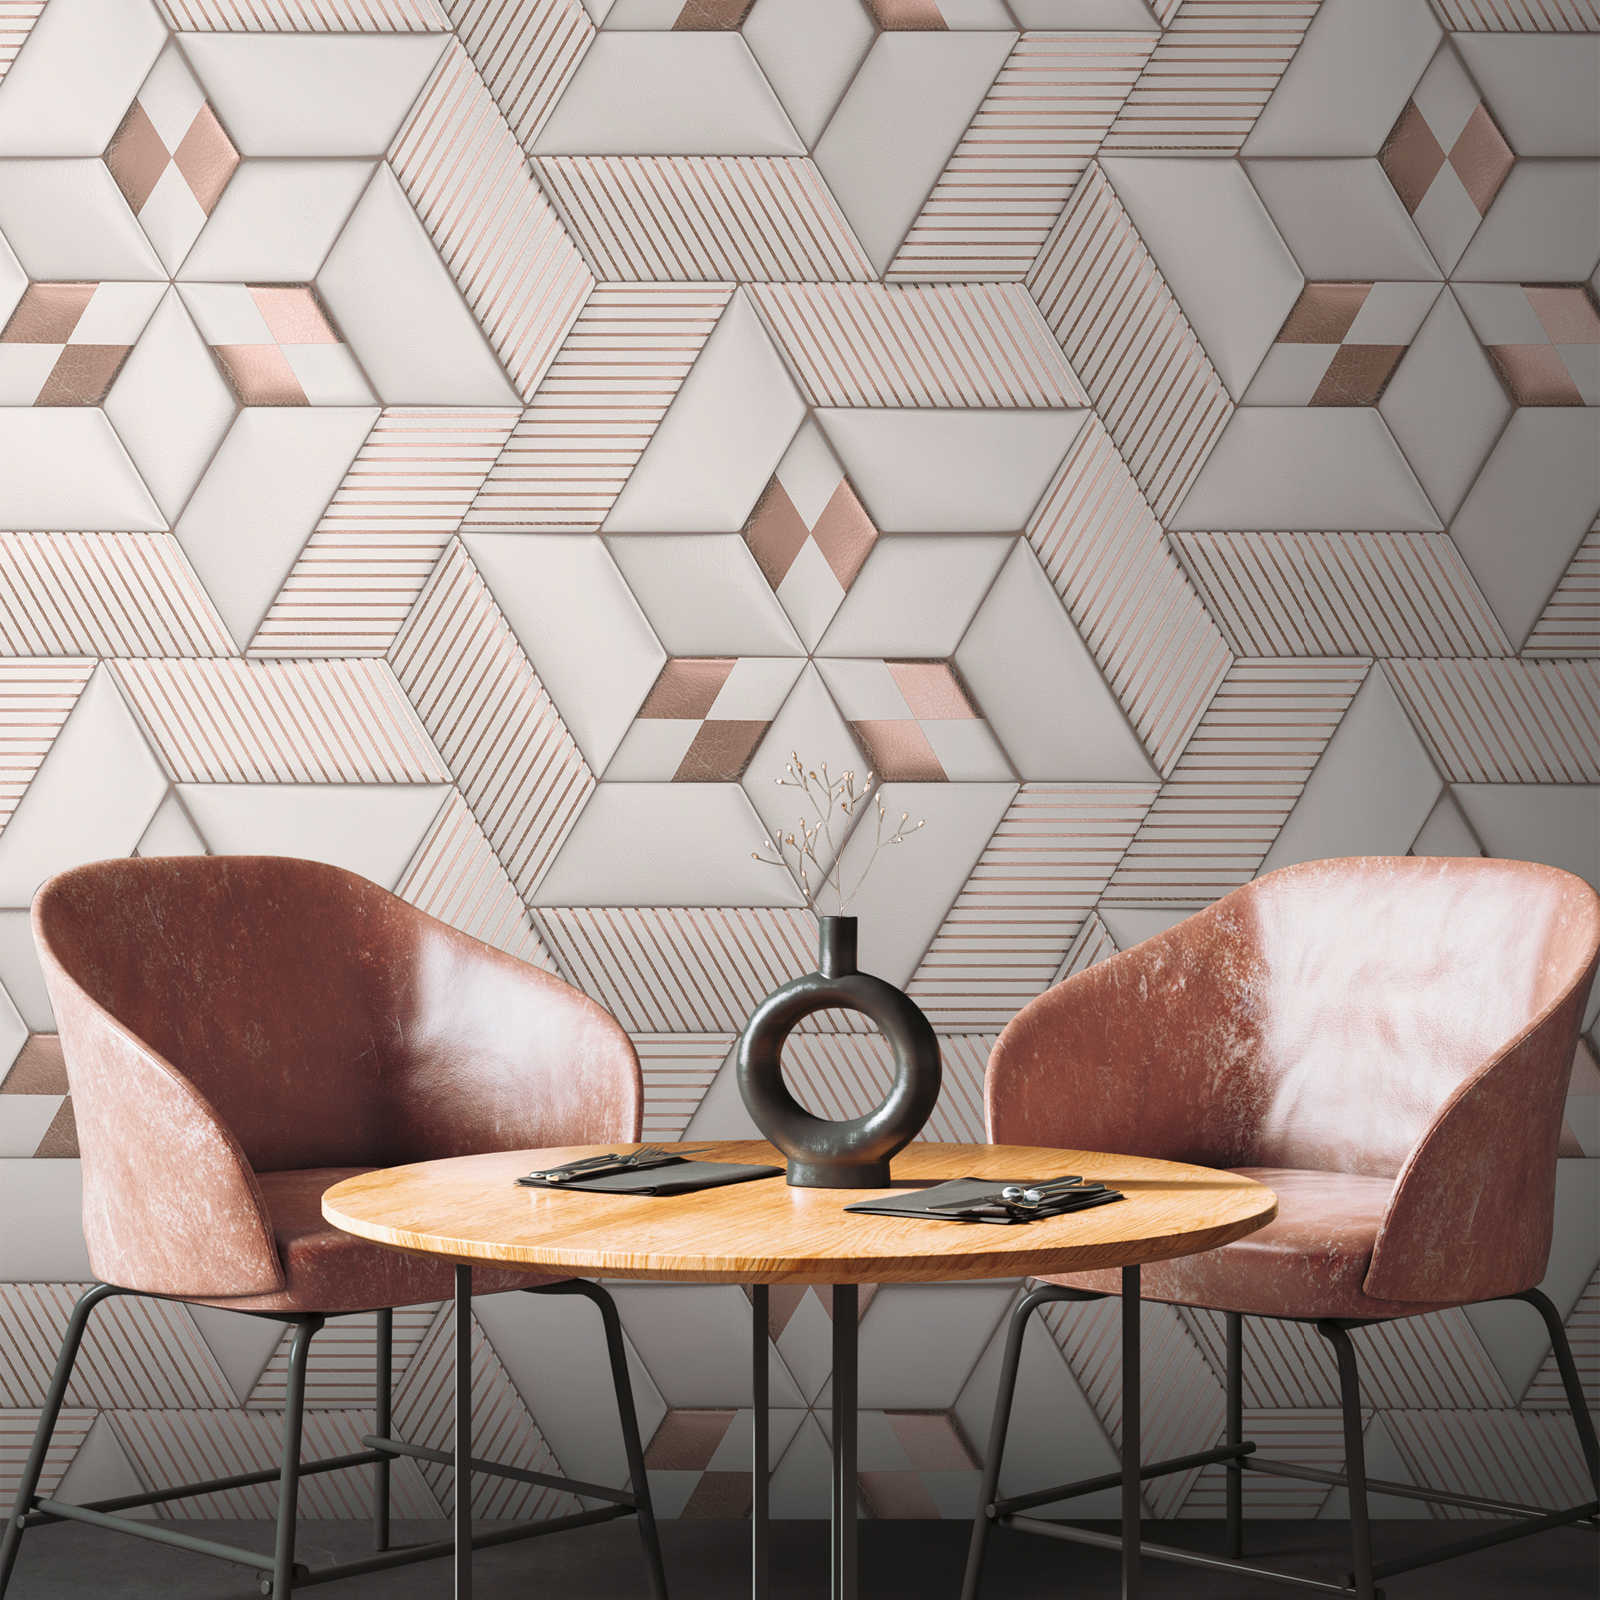         Non-woven wallpaper with abstract 3D pattern - white, cream, bronze
    